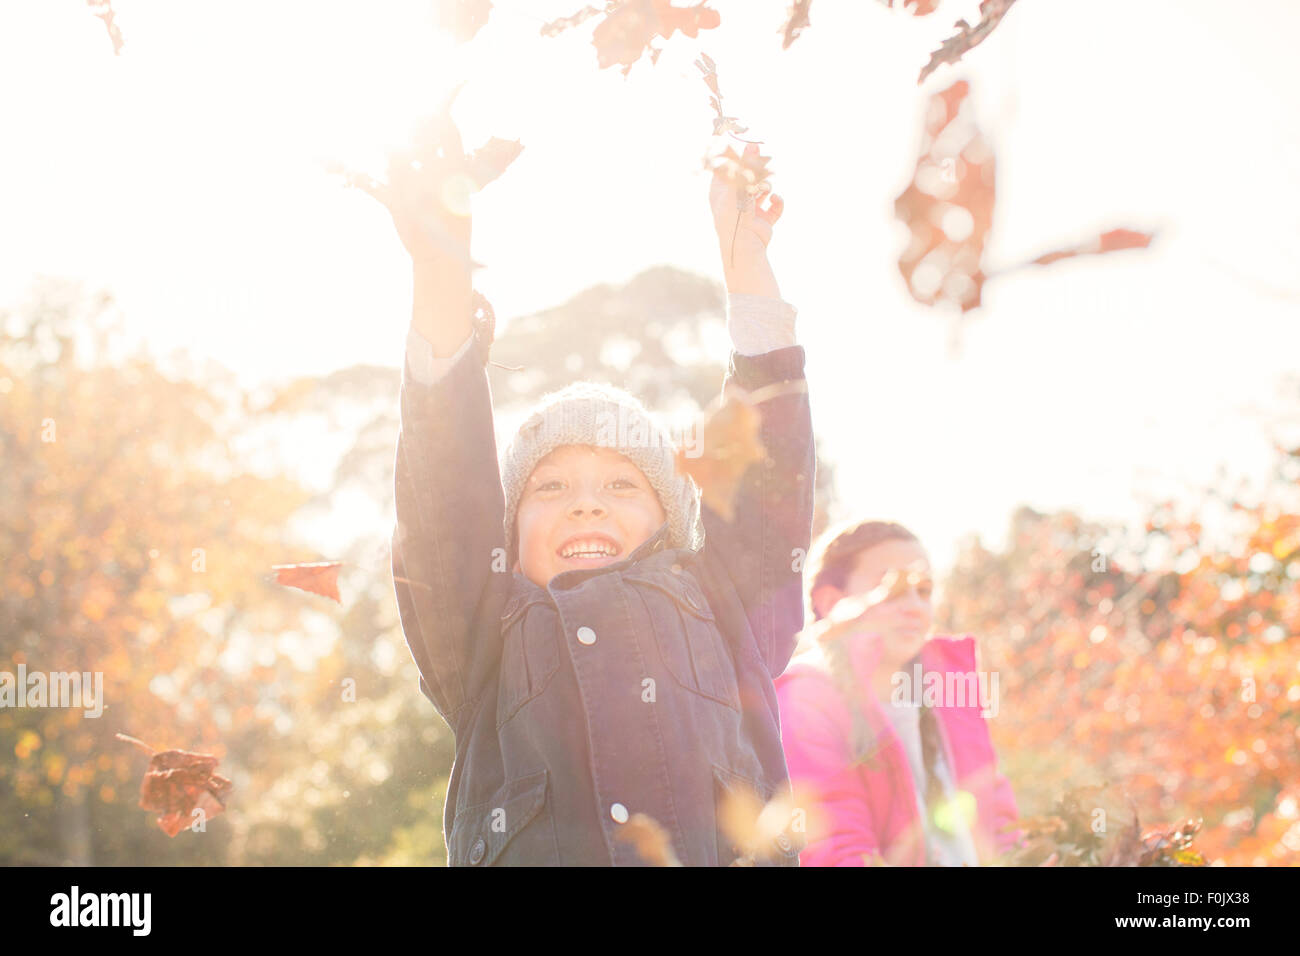 Enthusiastic boy playing in autumn leaves Stock Photo